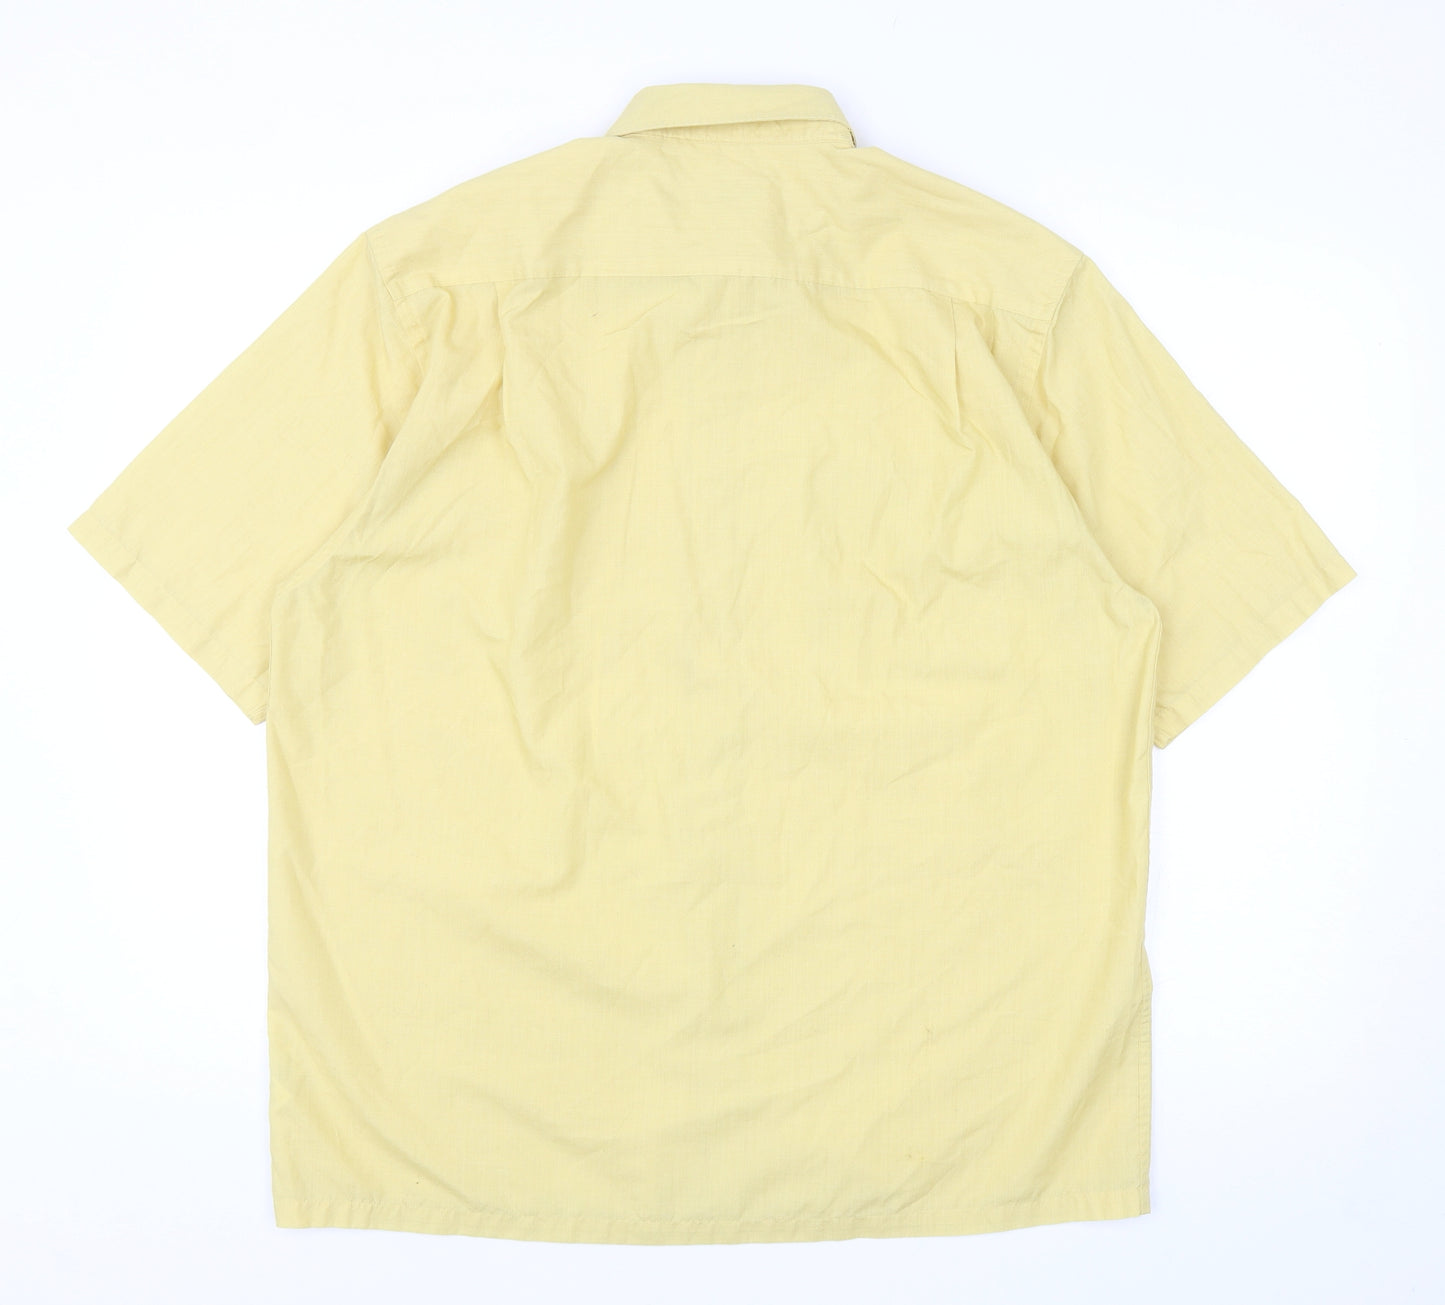 George Mens Yellow Cotton Button-Up Size M Collared Button